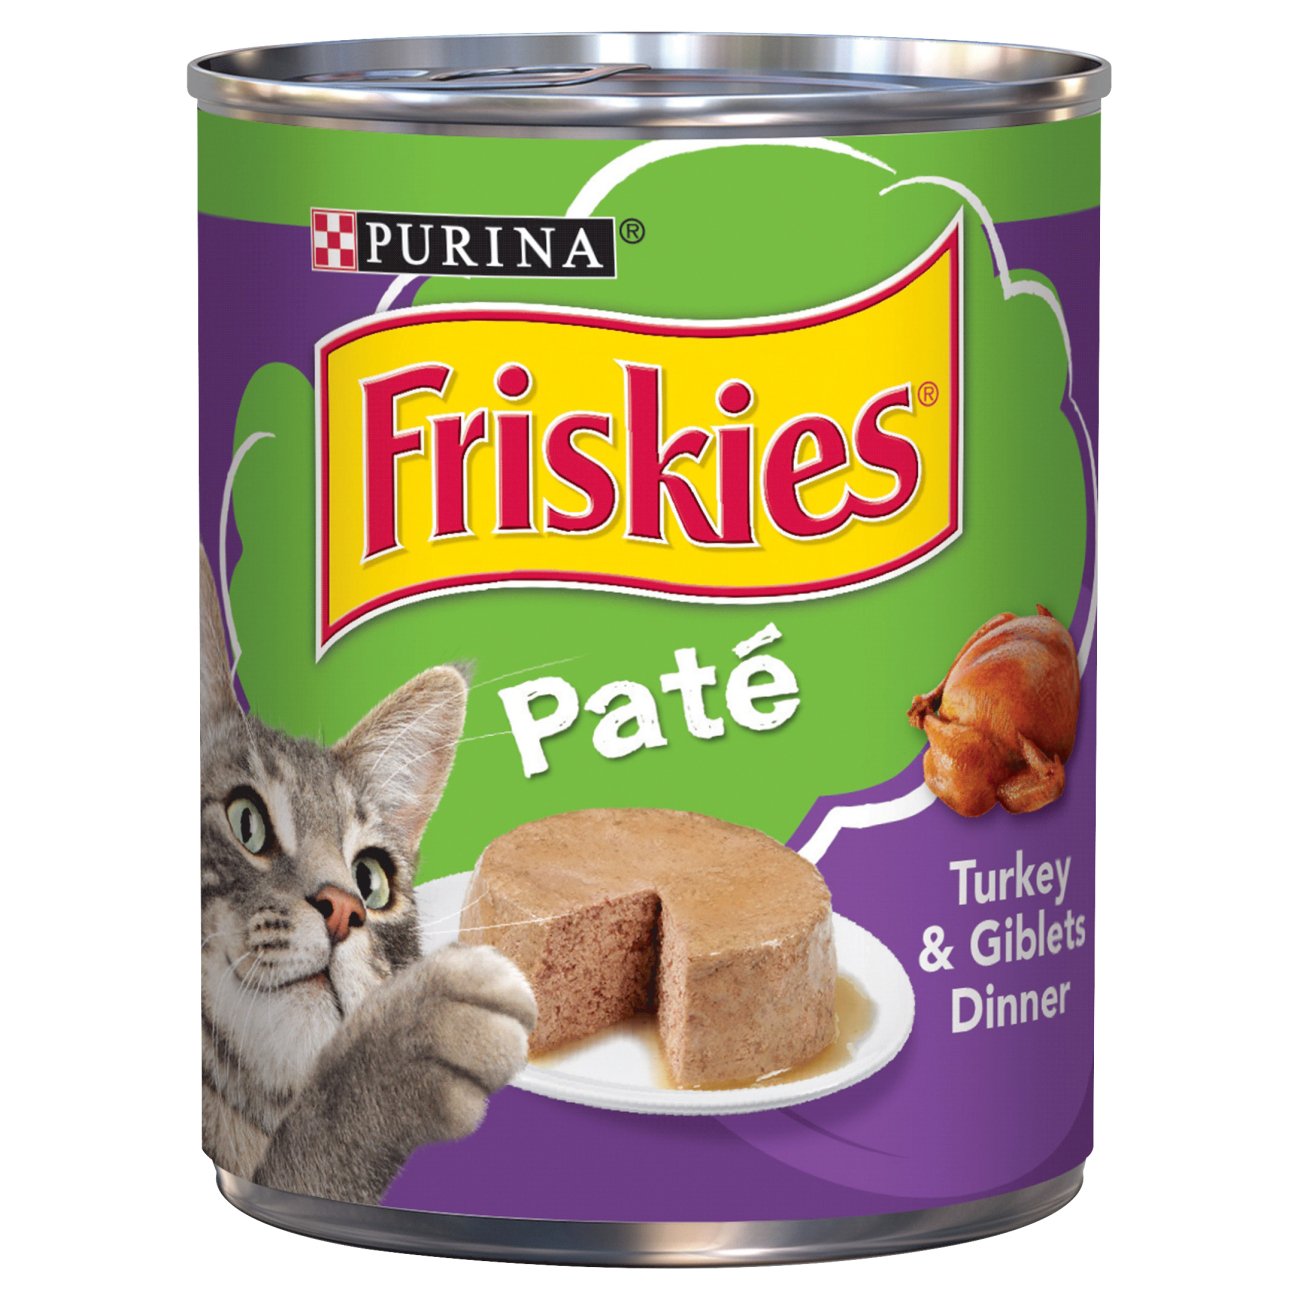 Purina Friskies Pate Turkey Giblets Dinner Cat Food Shop Cats At H E B